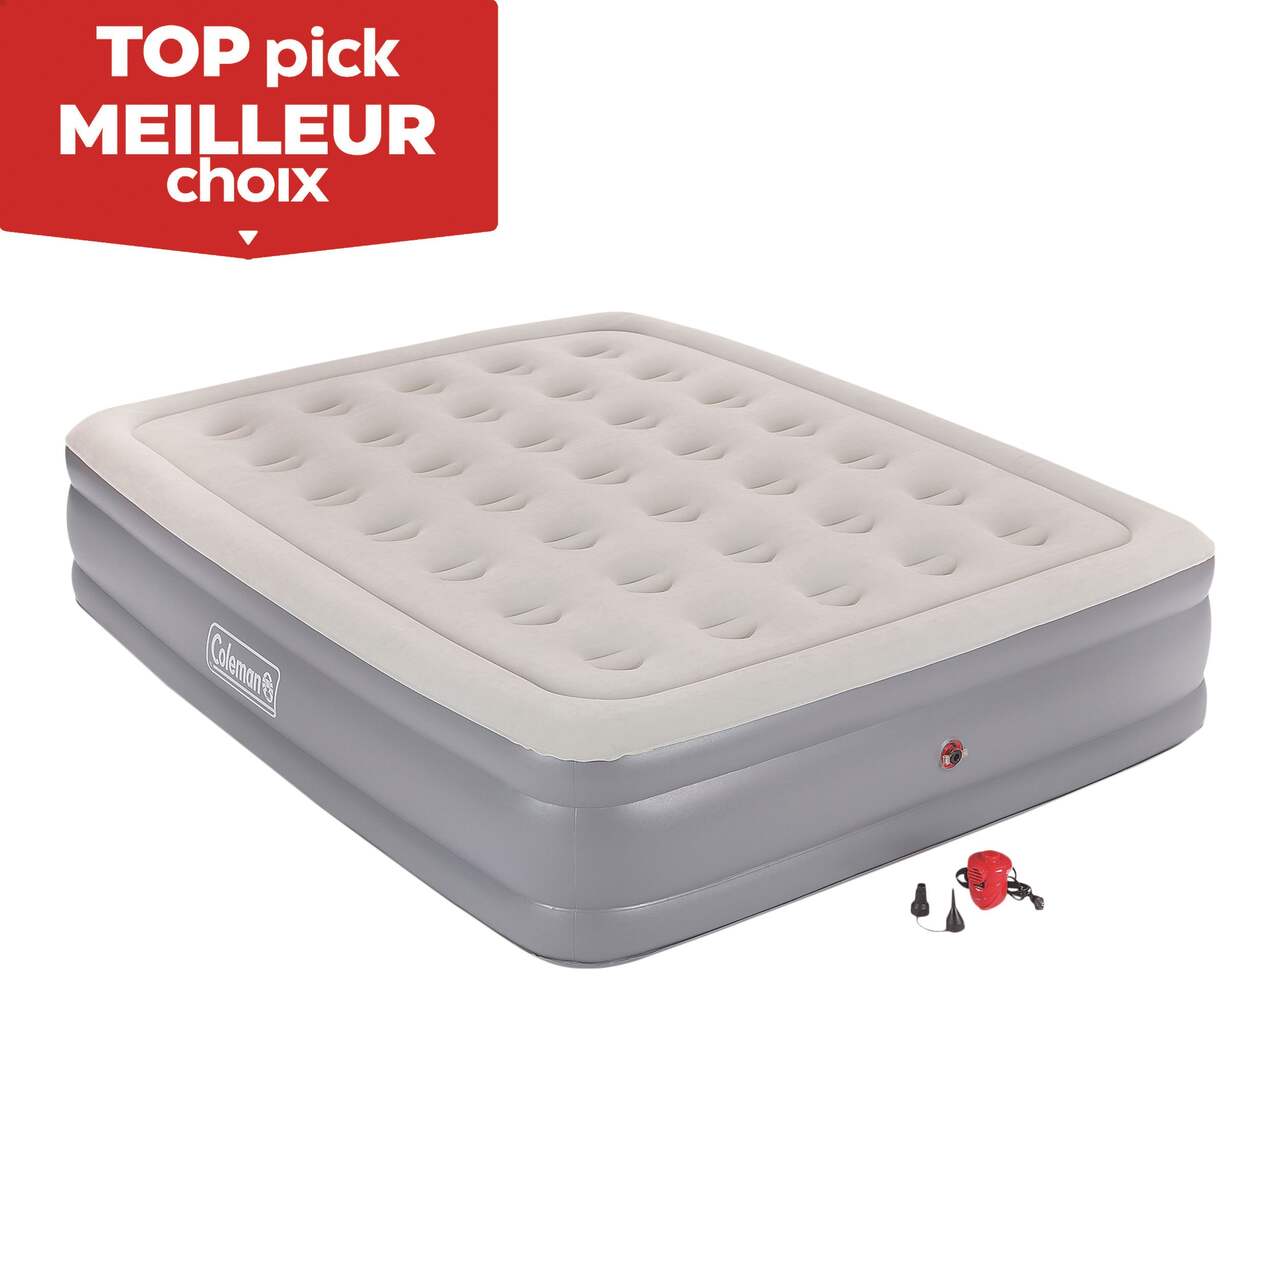 https://media-www.canadiantire.ca/product/playing/camping/camping-furniture/0762804/coleman-double-high-airbed-with-pump-queen-a0abd3a8-c13a-4123-bdac-f9577225cd3a-jpgrendition.jpg?imdensity=1&imwidth=640&impolicy=mZoom